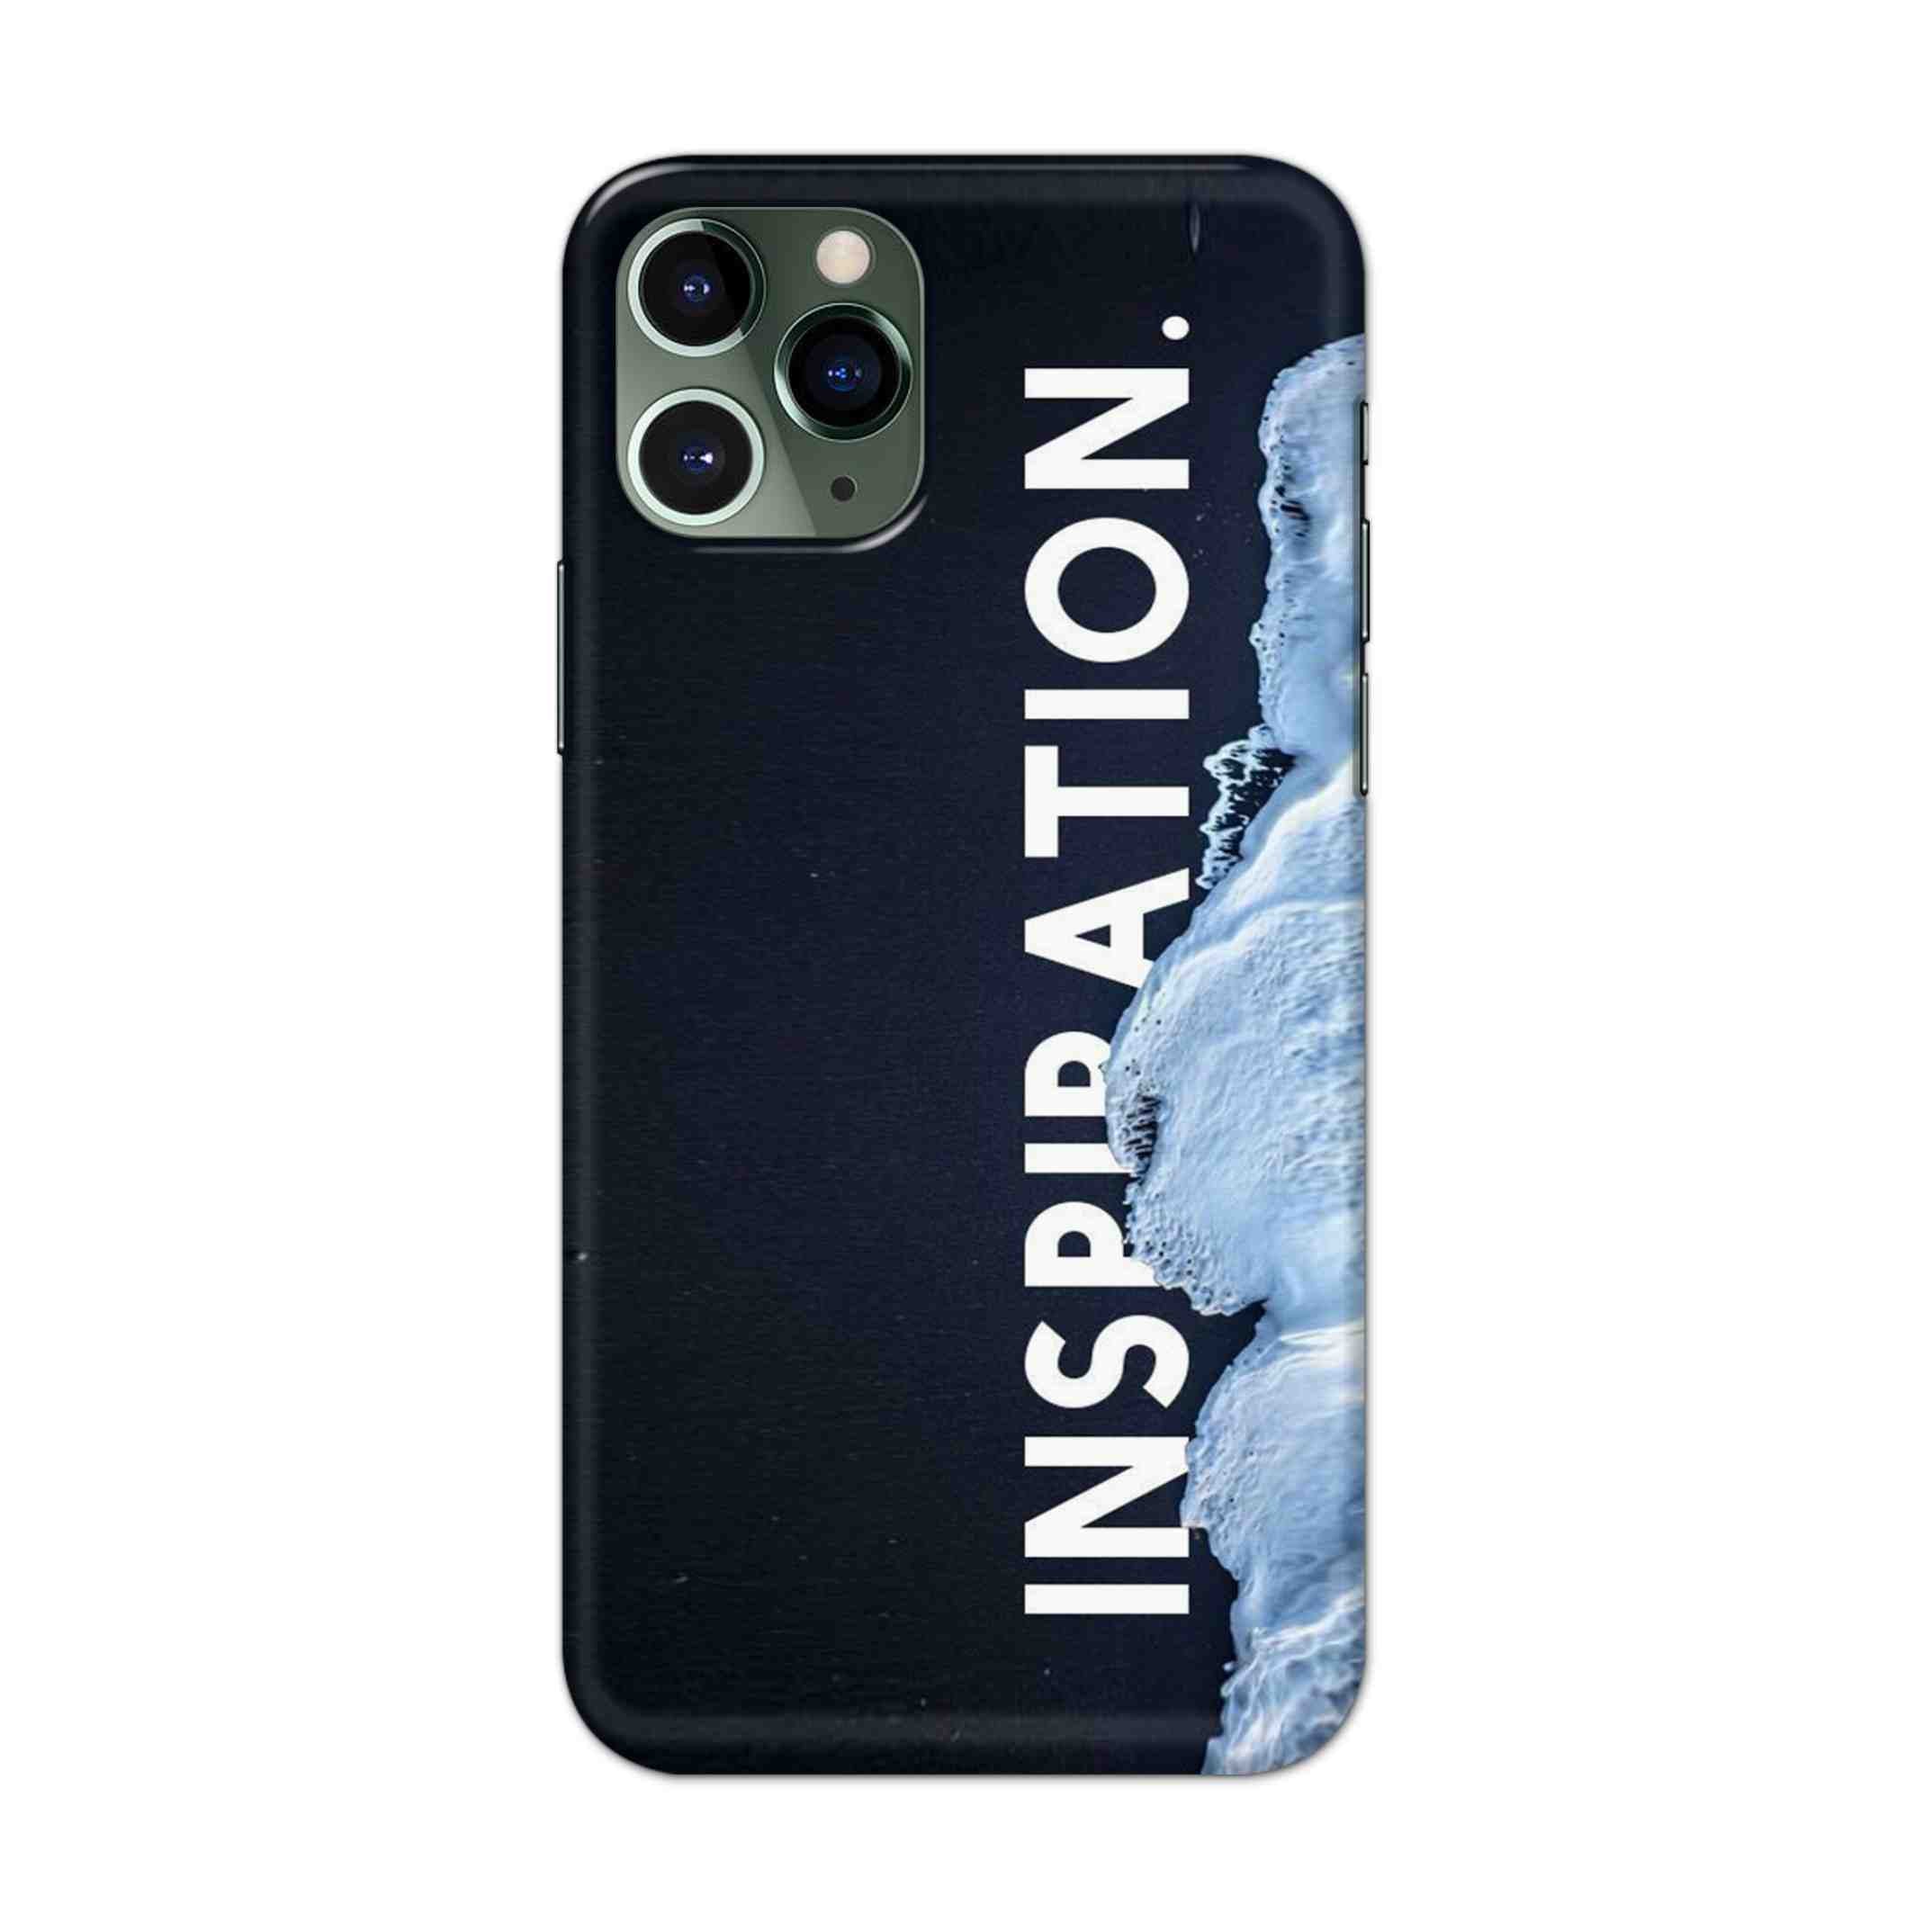 Buy Inspiration Hard Back Mobile Phone Case/Cover For iPhone 11 Pro Online